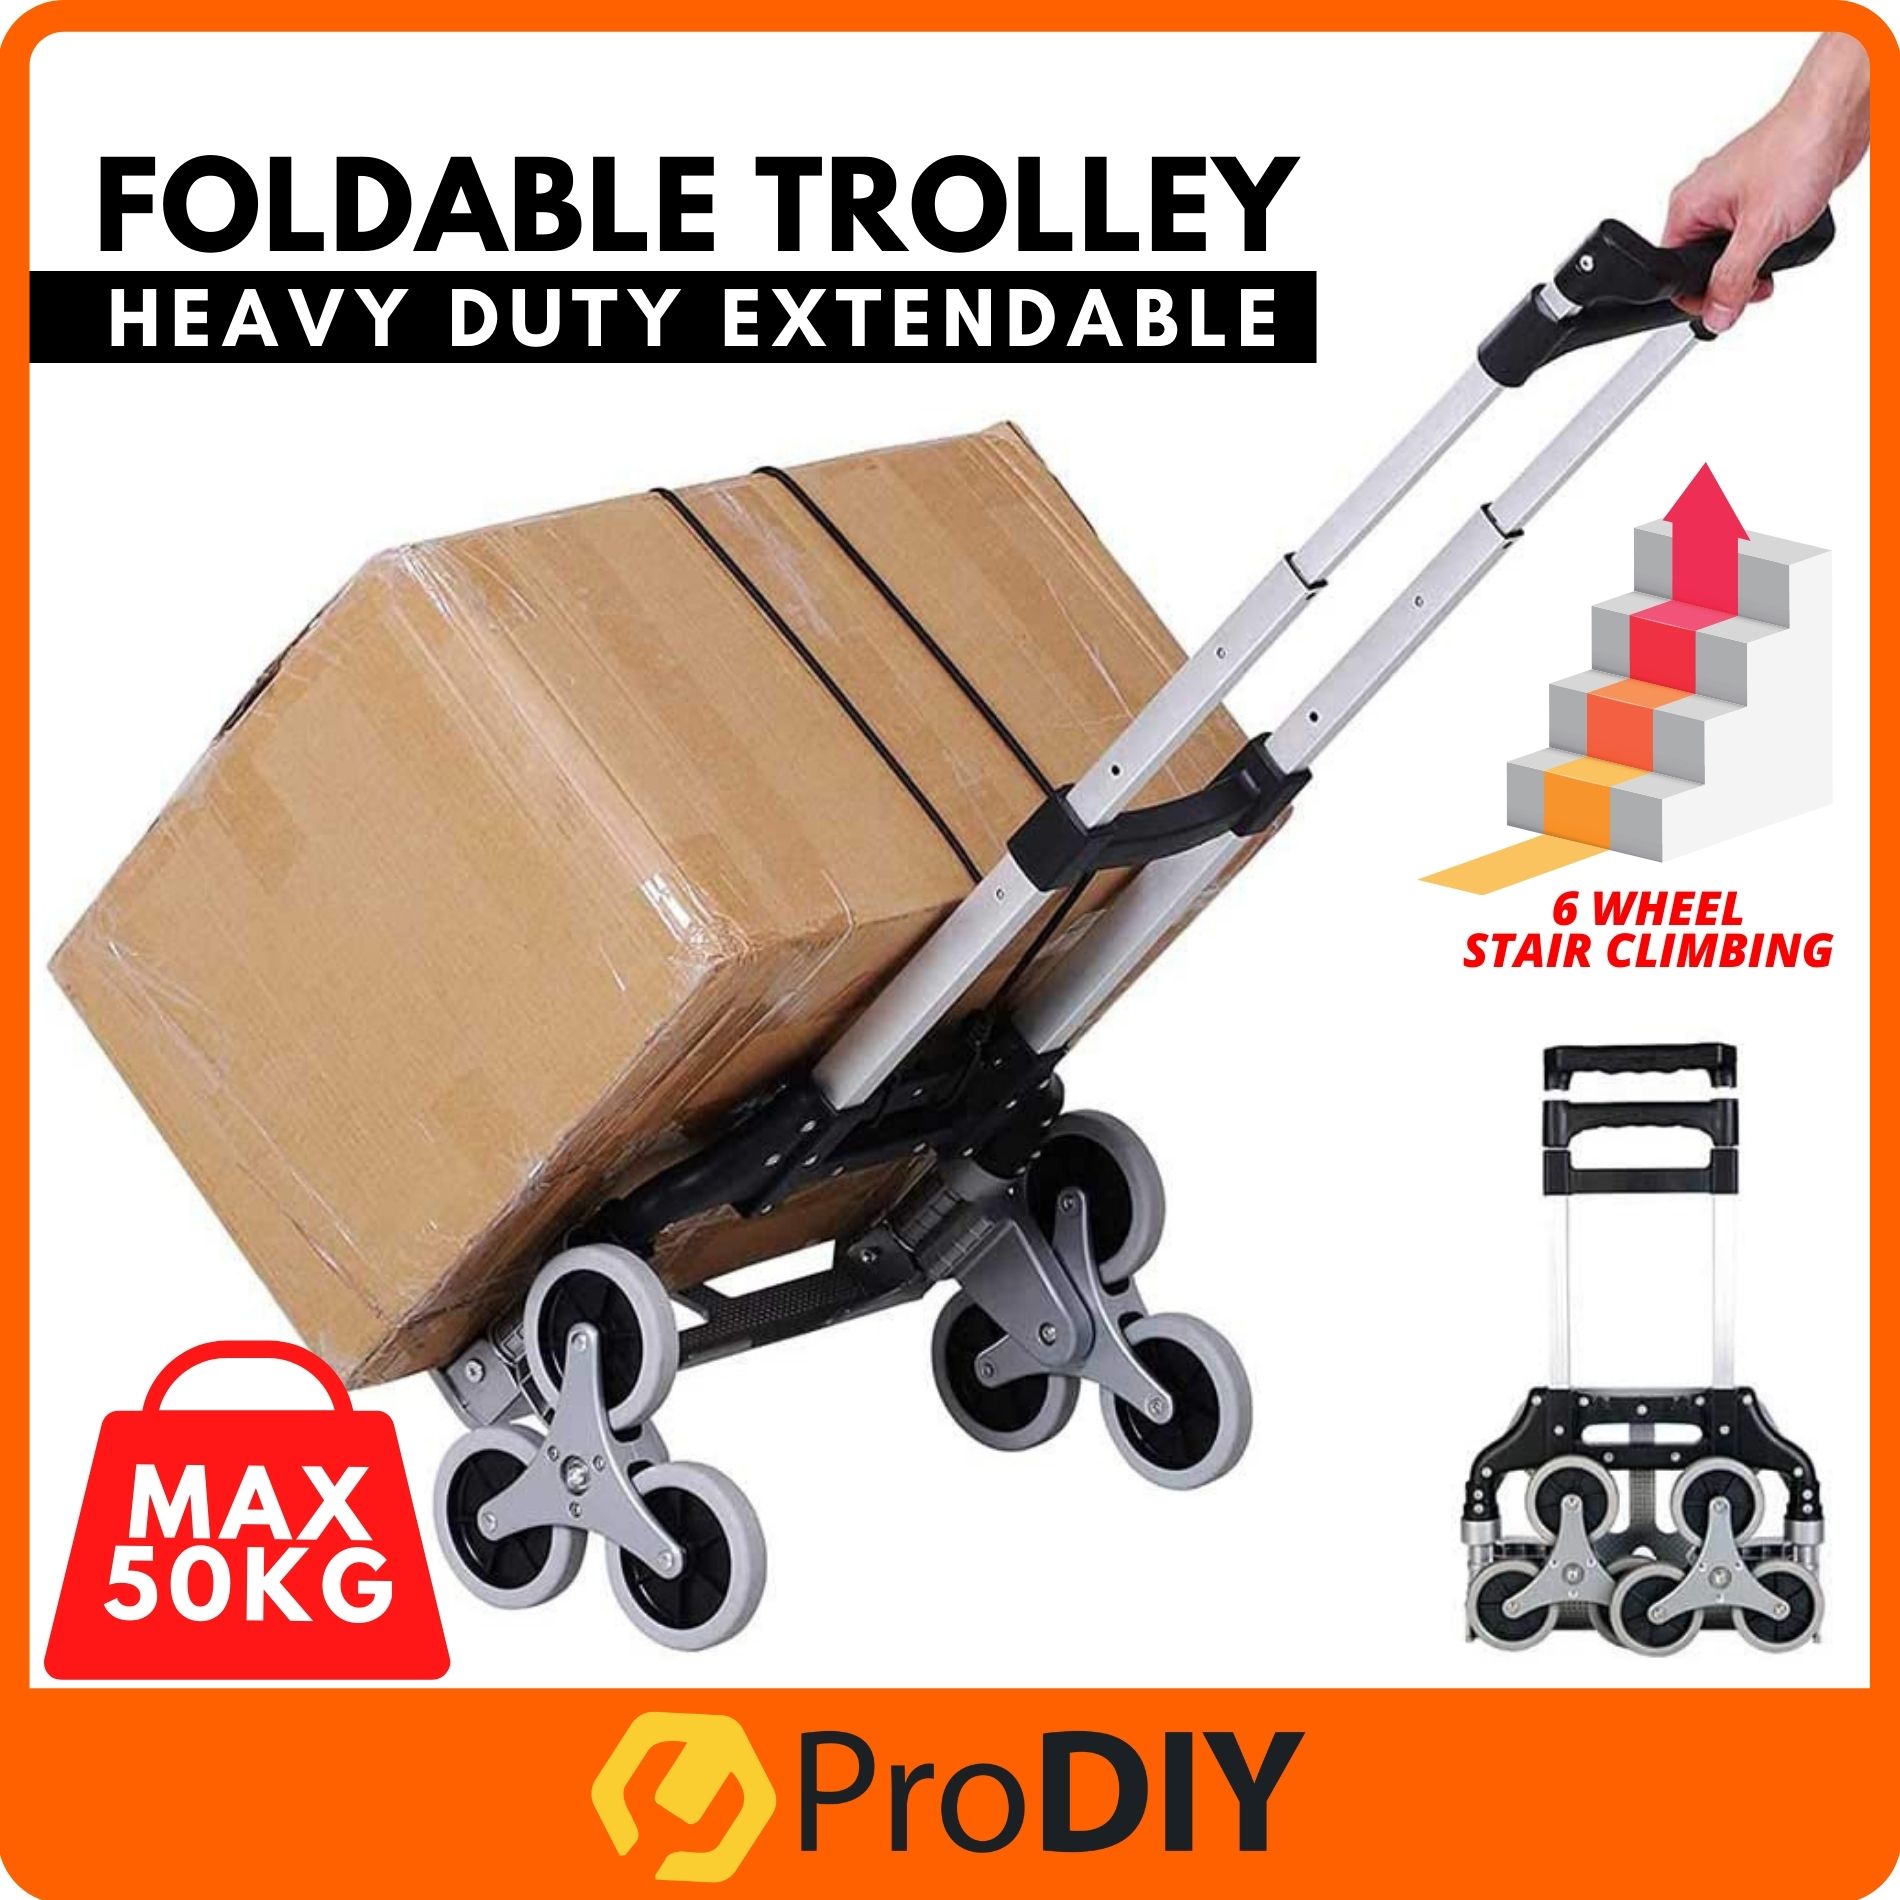 909 New Version Heavy Duty Extendable Portable Foldable Trolley Climb Stairs Hand Truck Multi Purpose